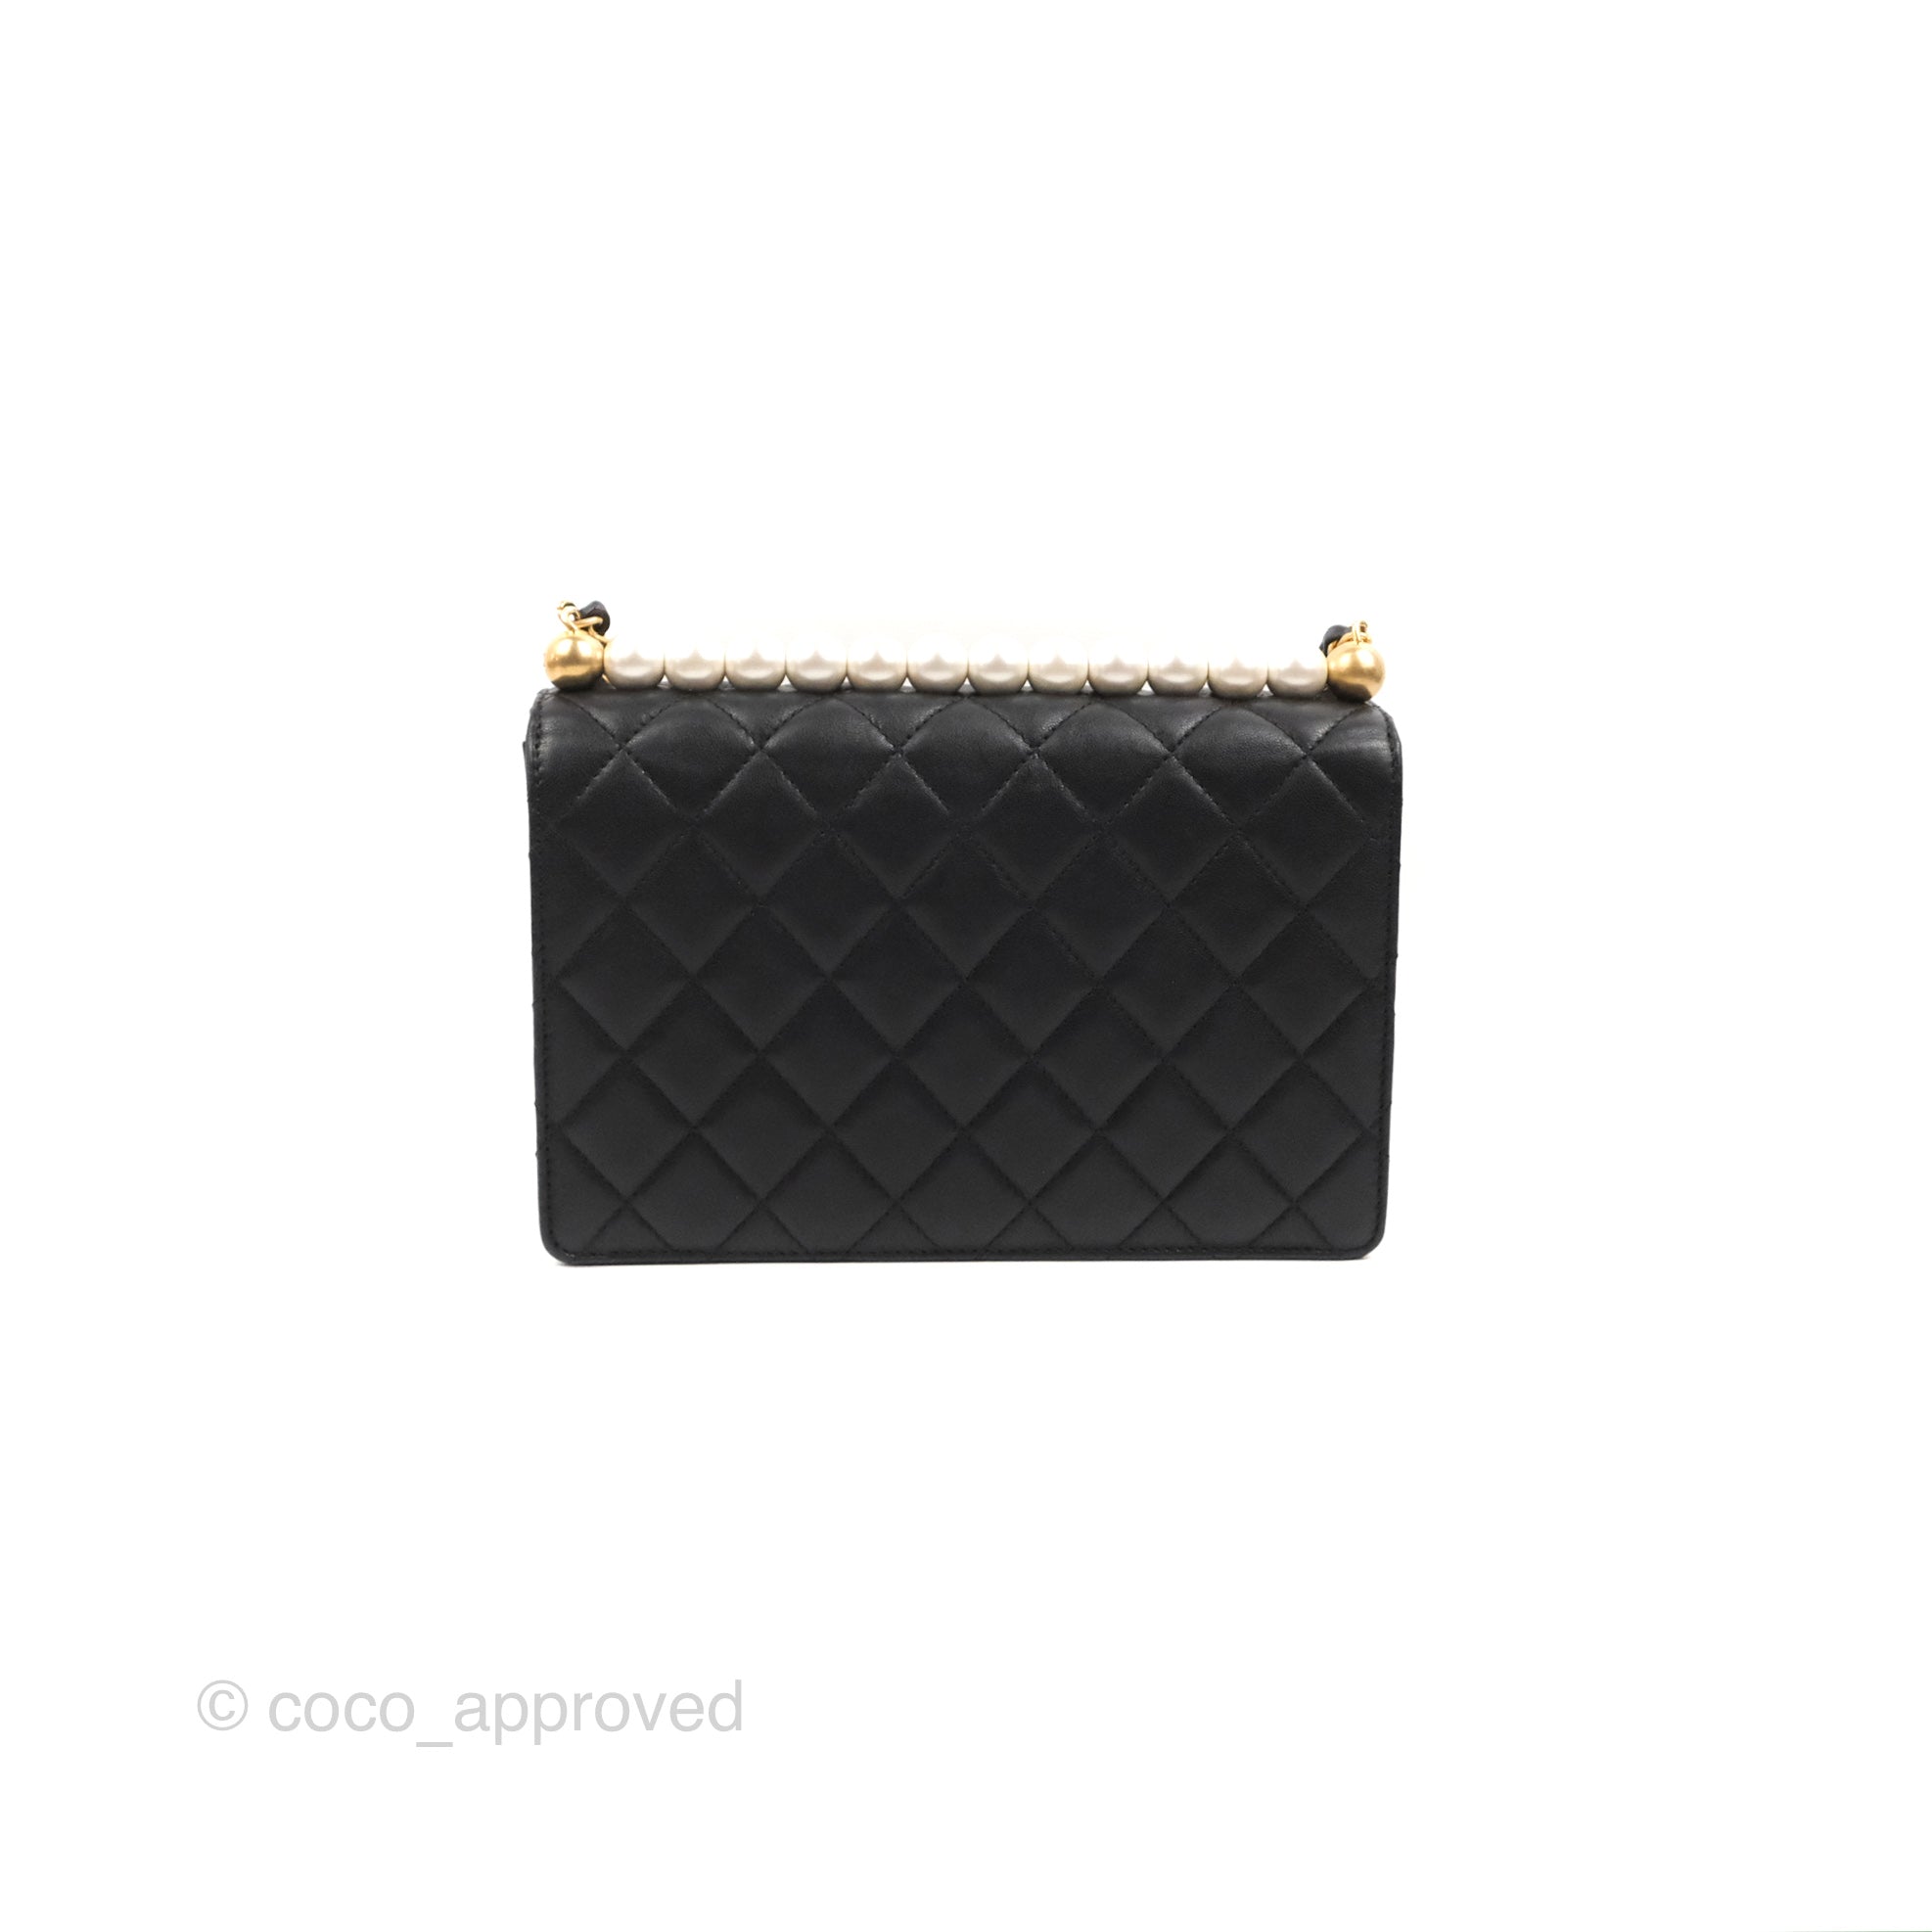 Chanel Chic Pearl Flap